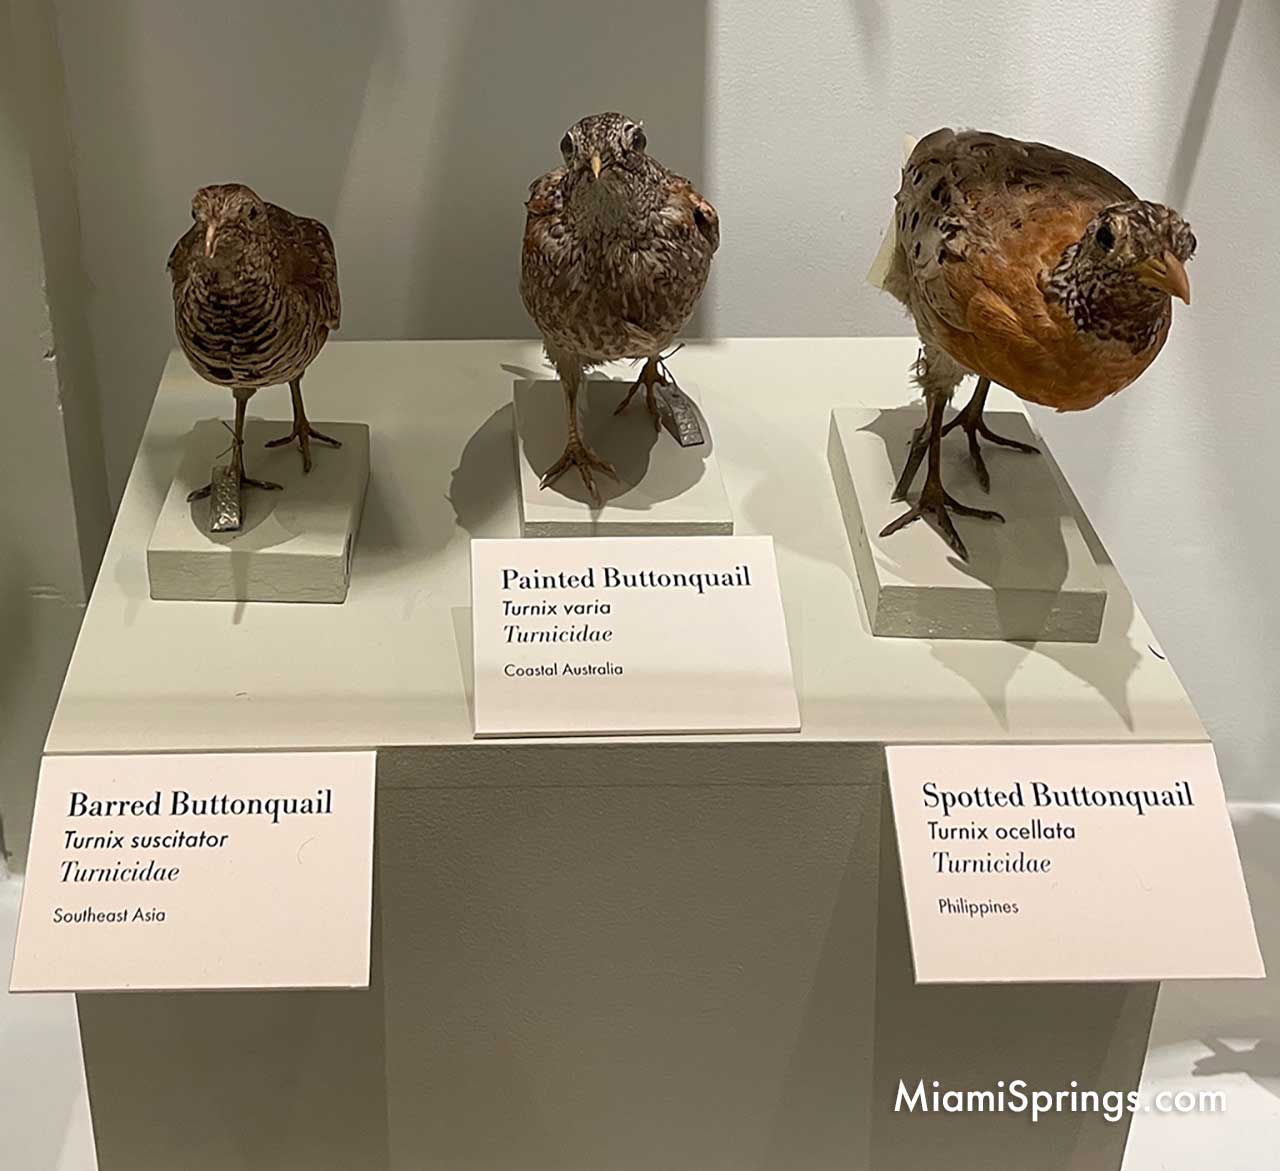 Buttonquail displayed at the Harvard Museum of Natural History